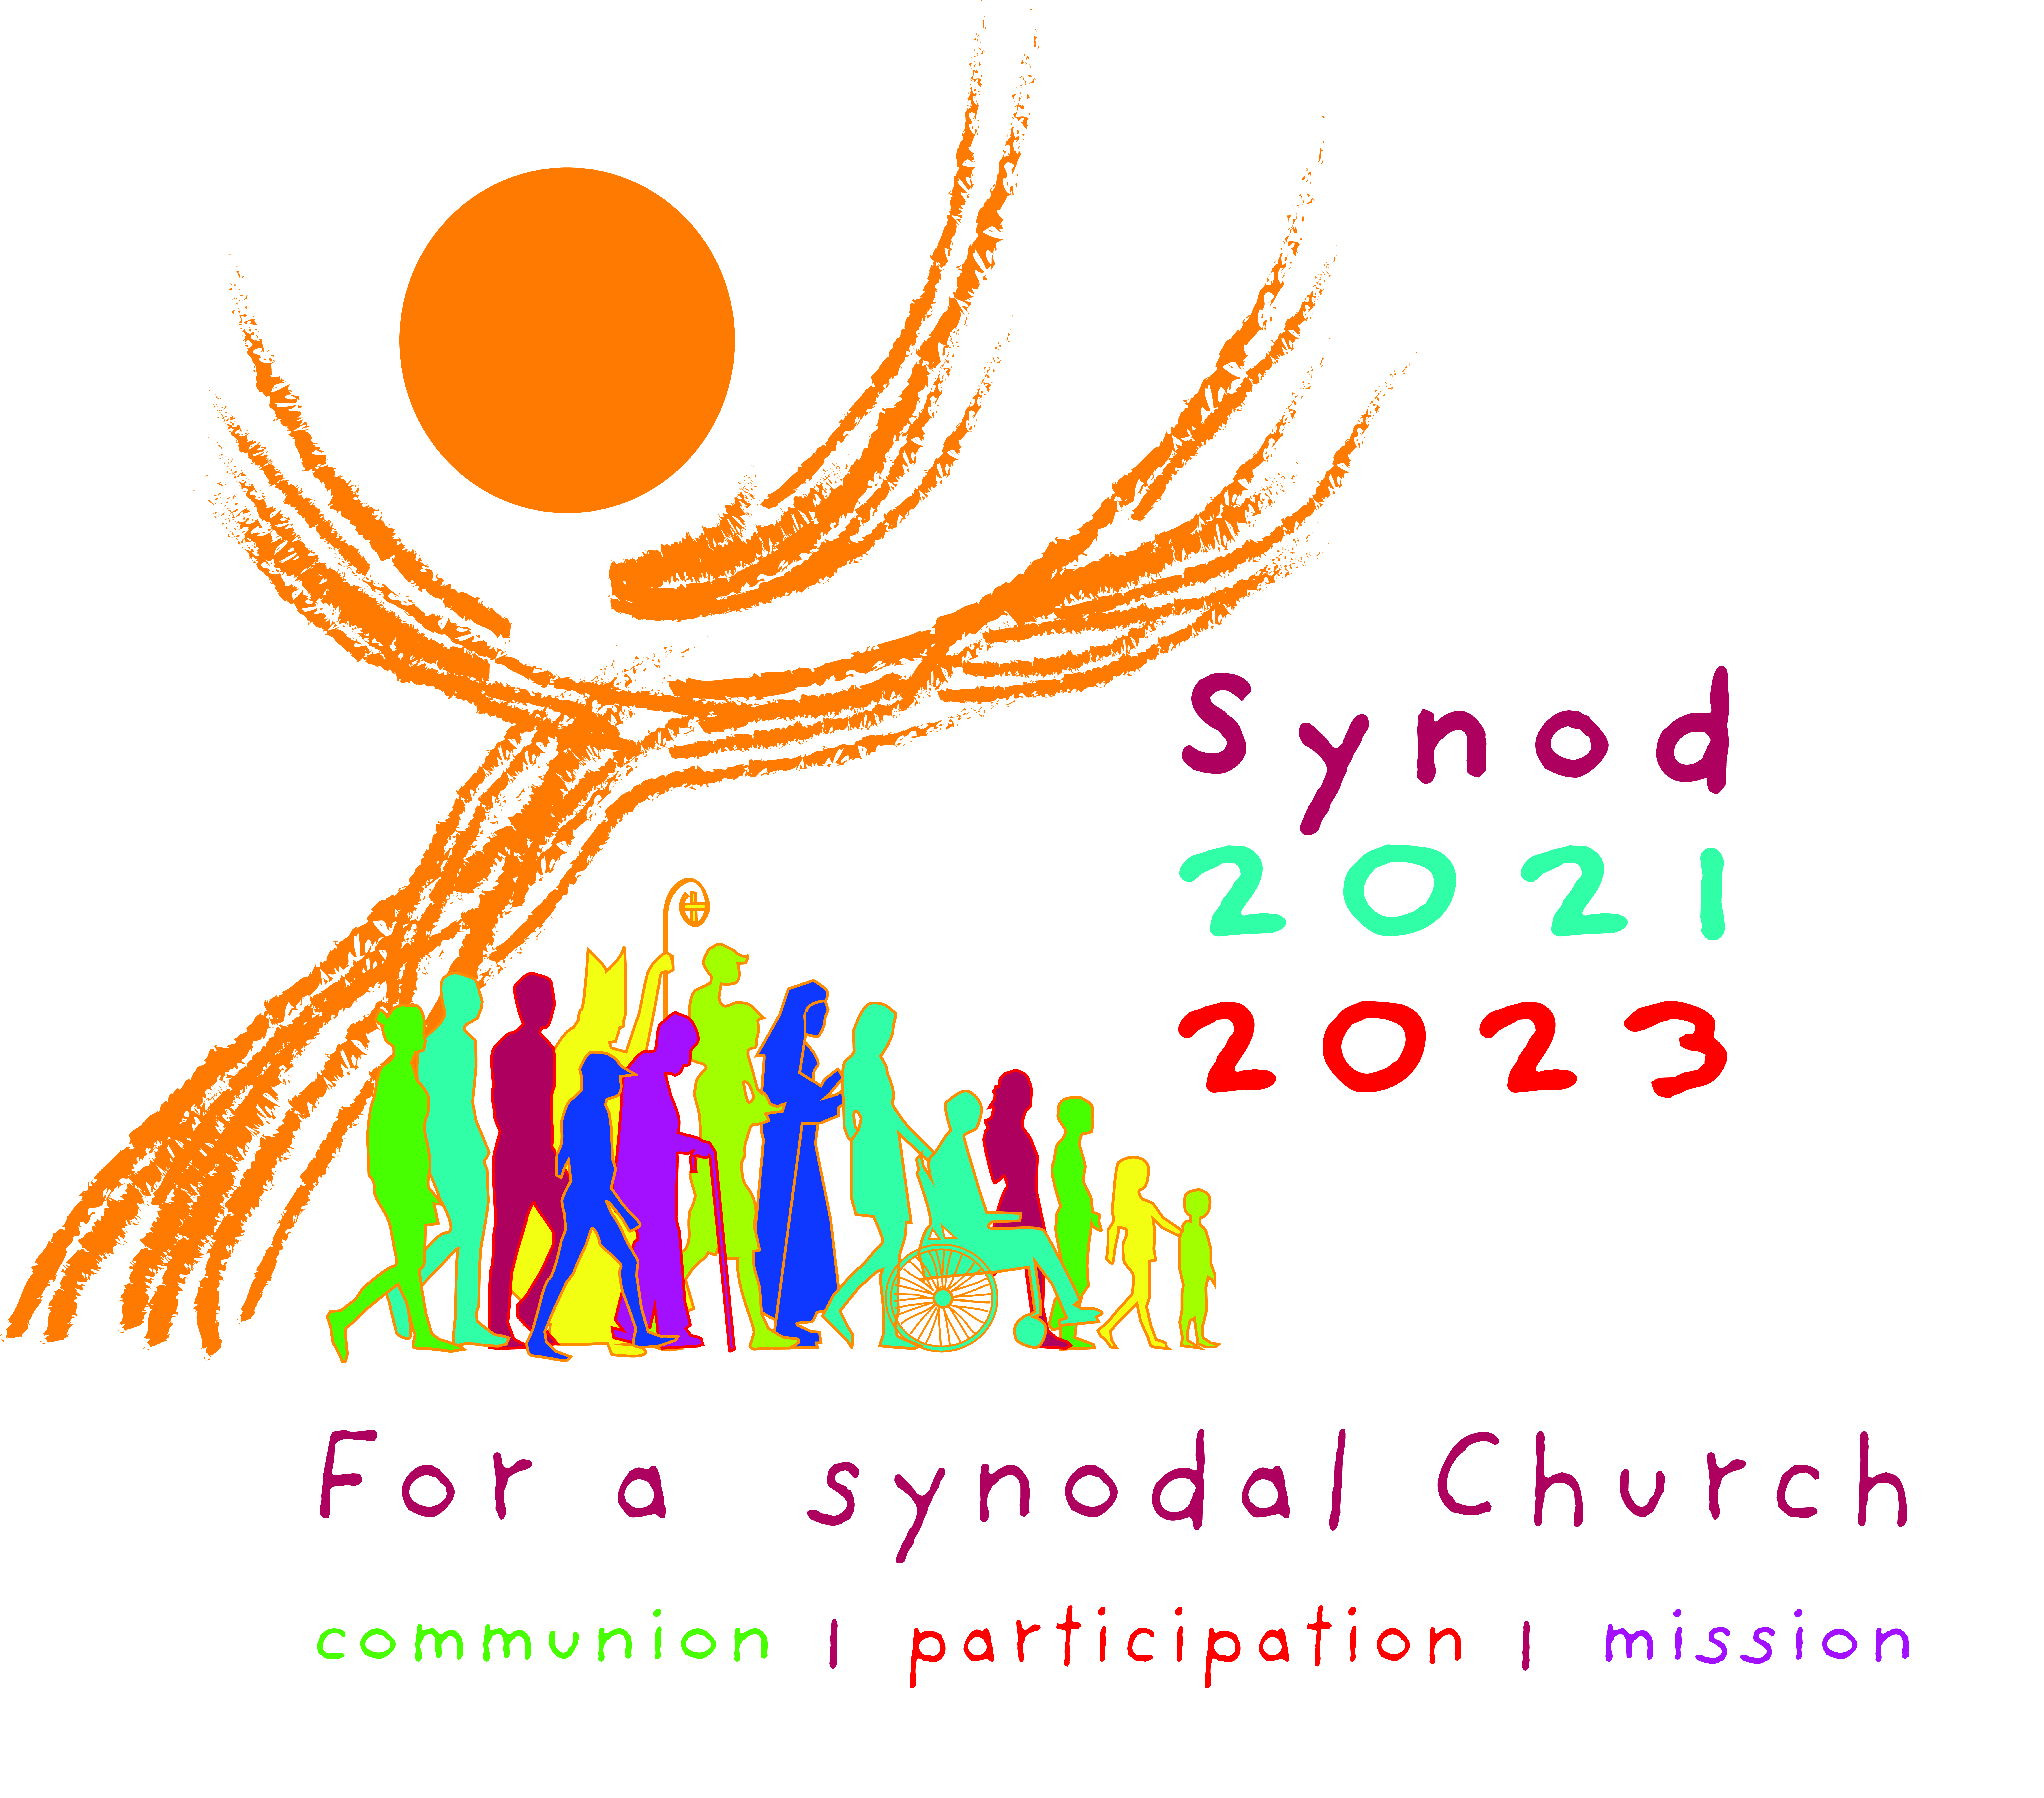 Synod – in Sketches explained